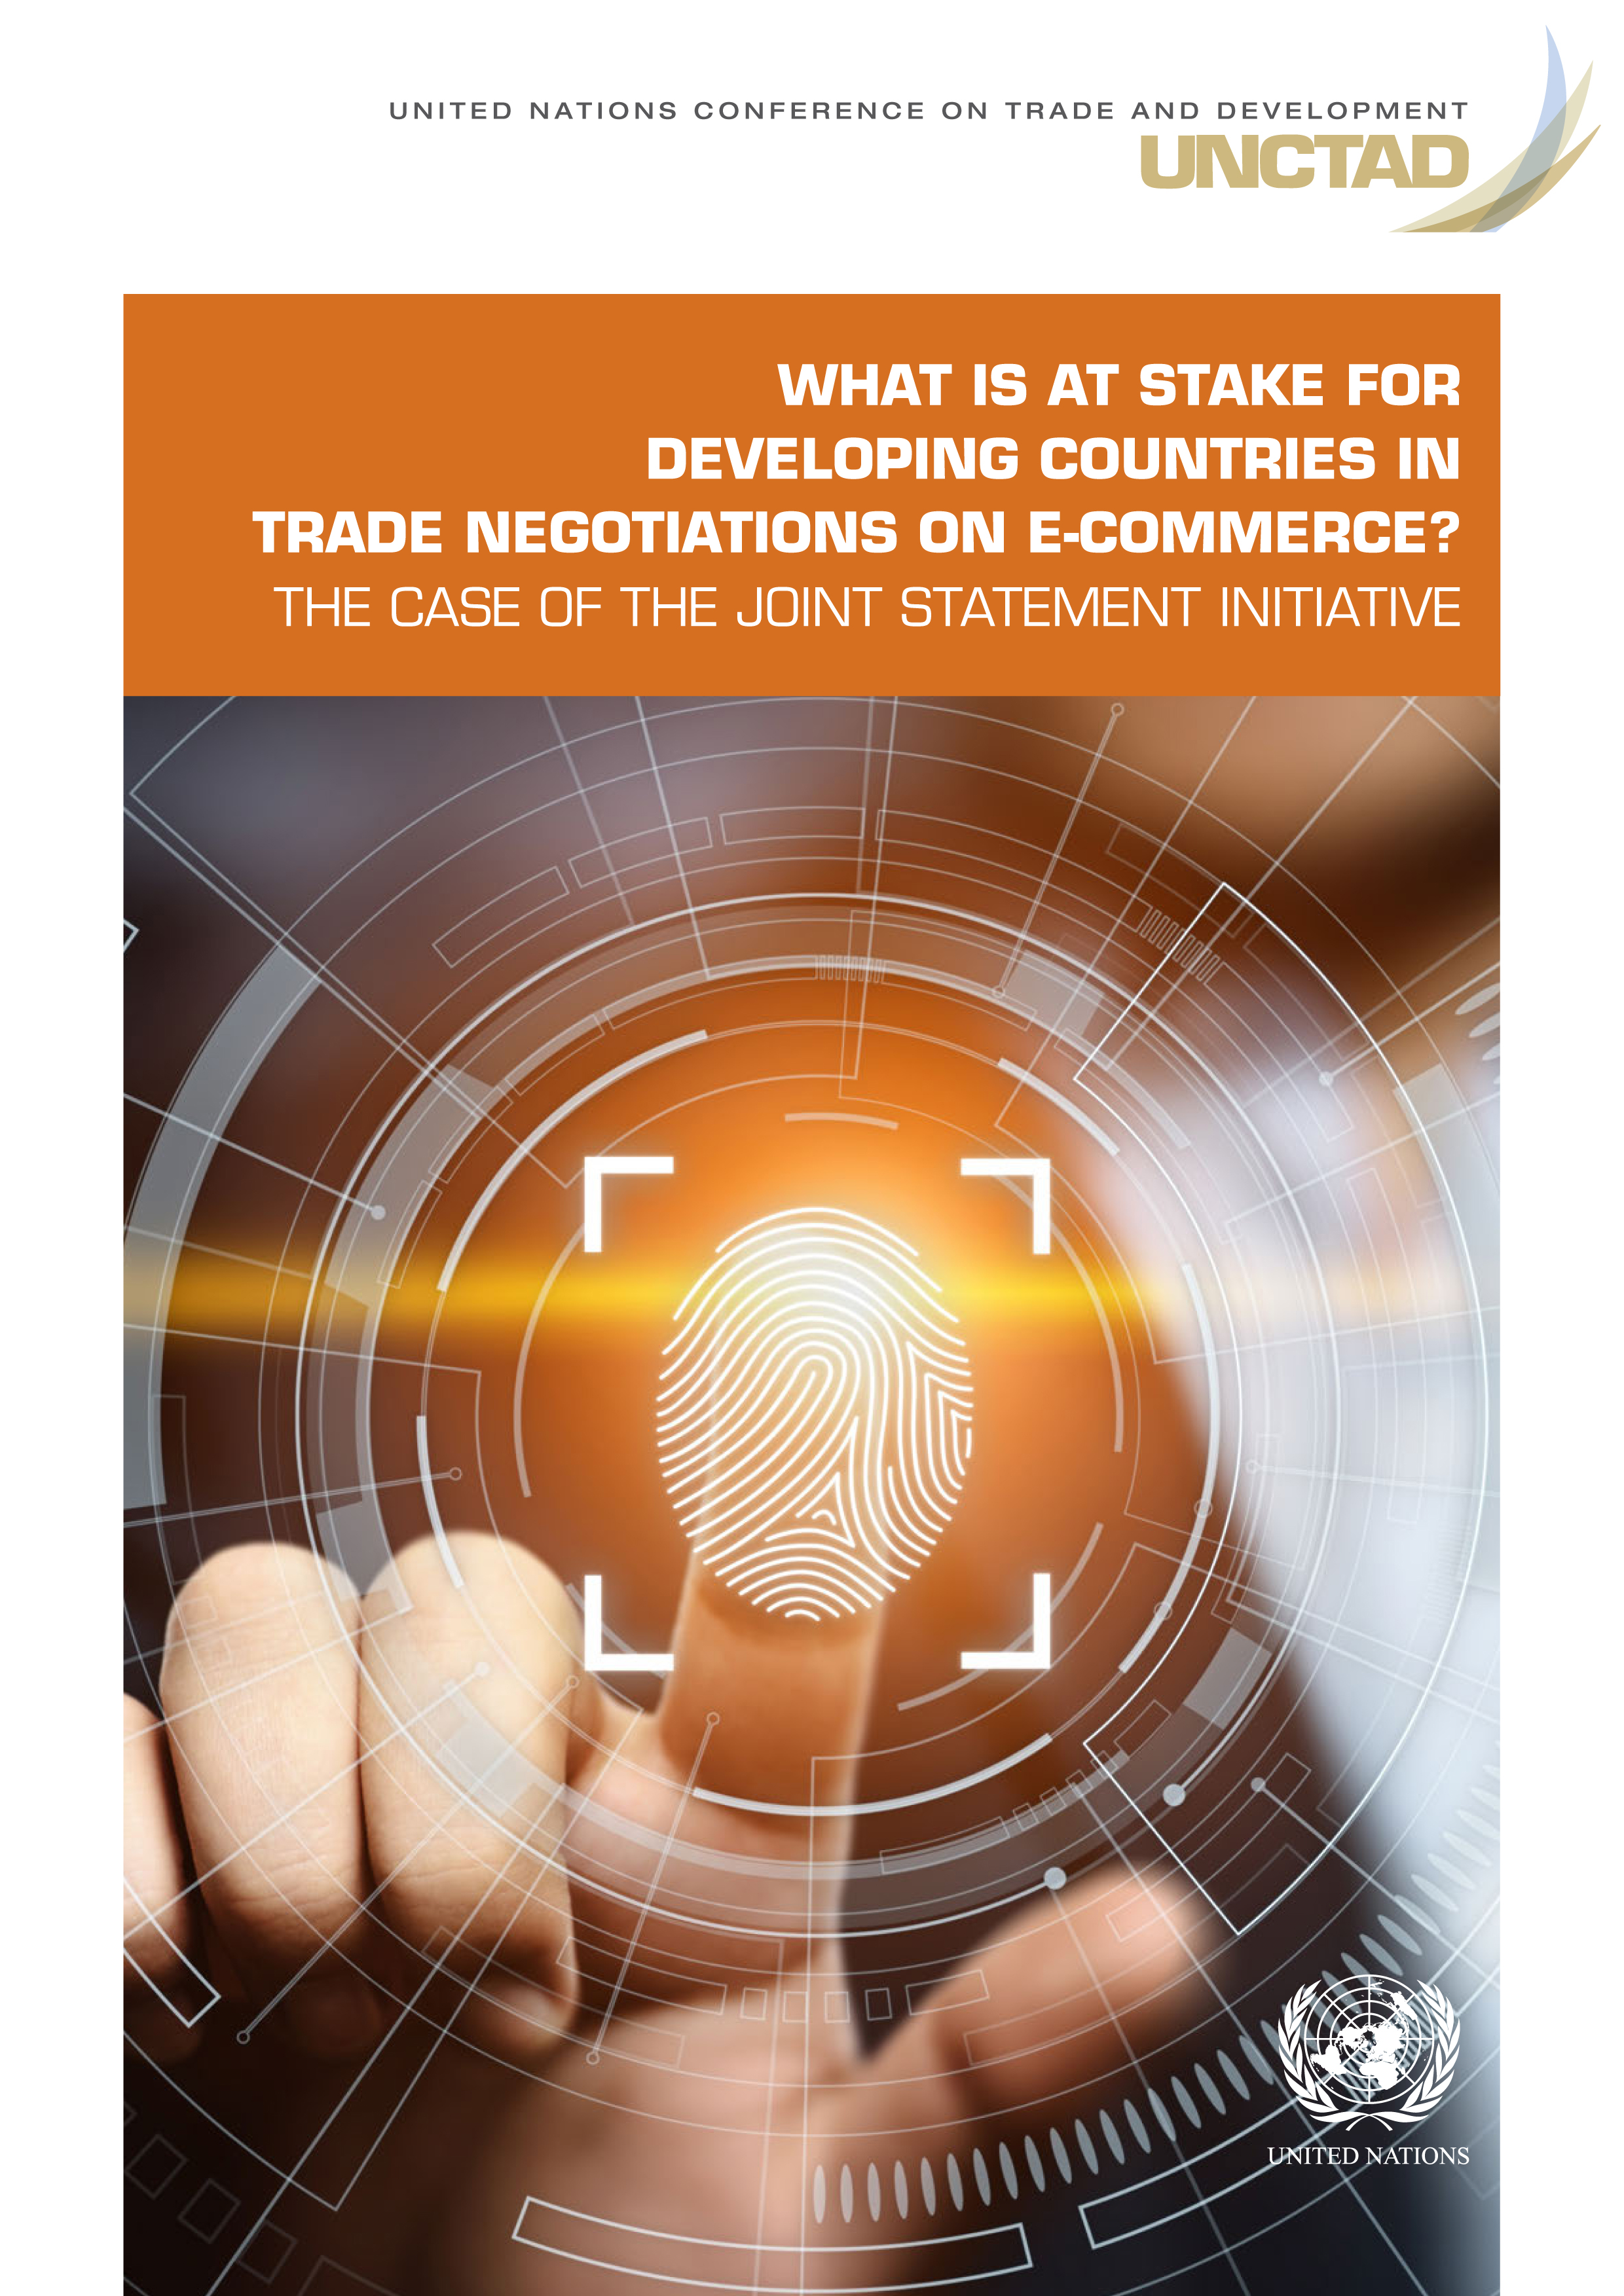 image of Systemic challenges: The JSI negotiations and WTO